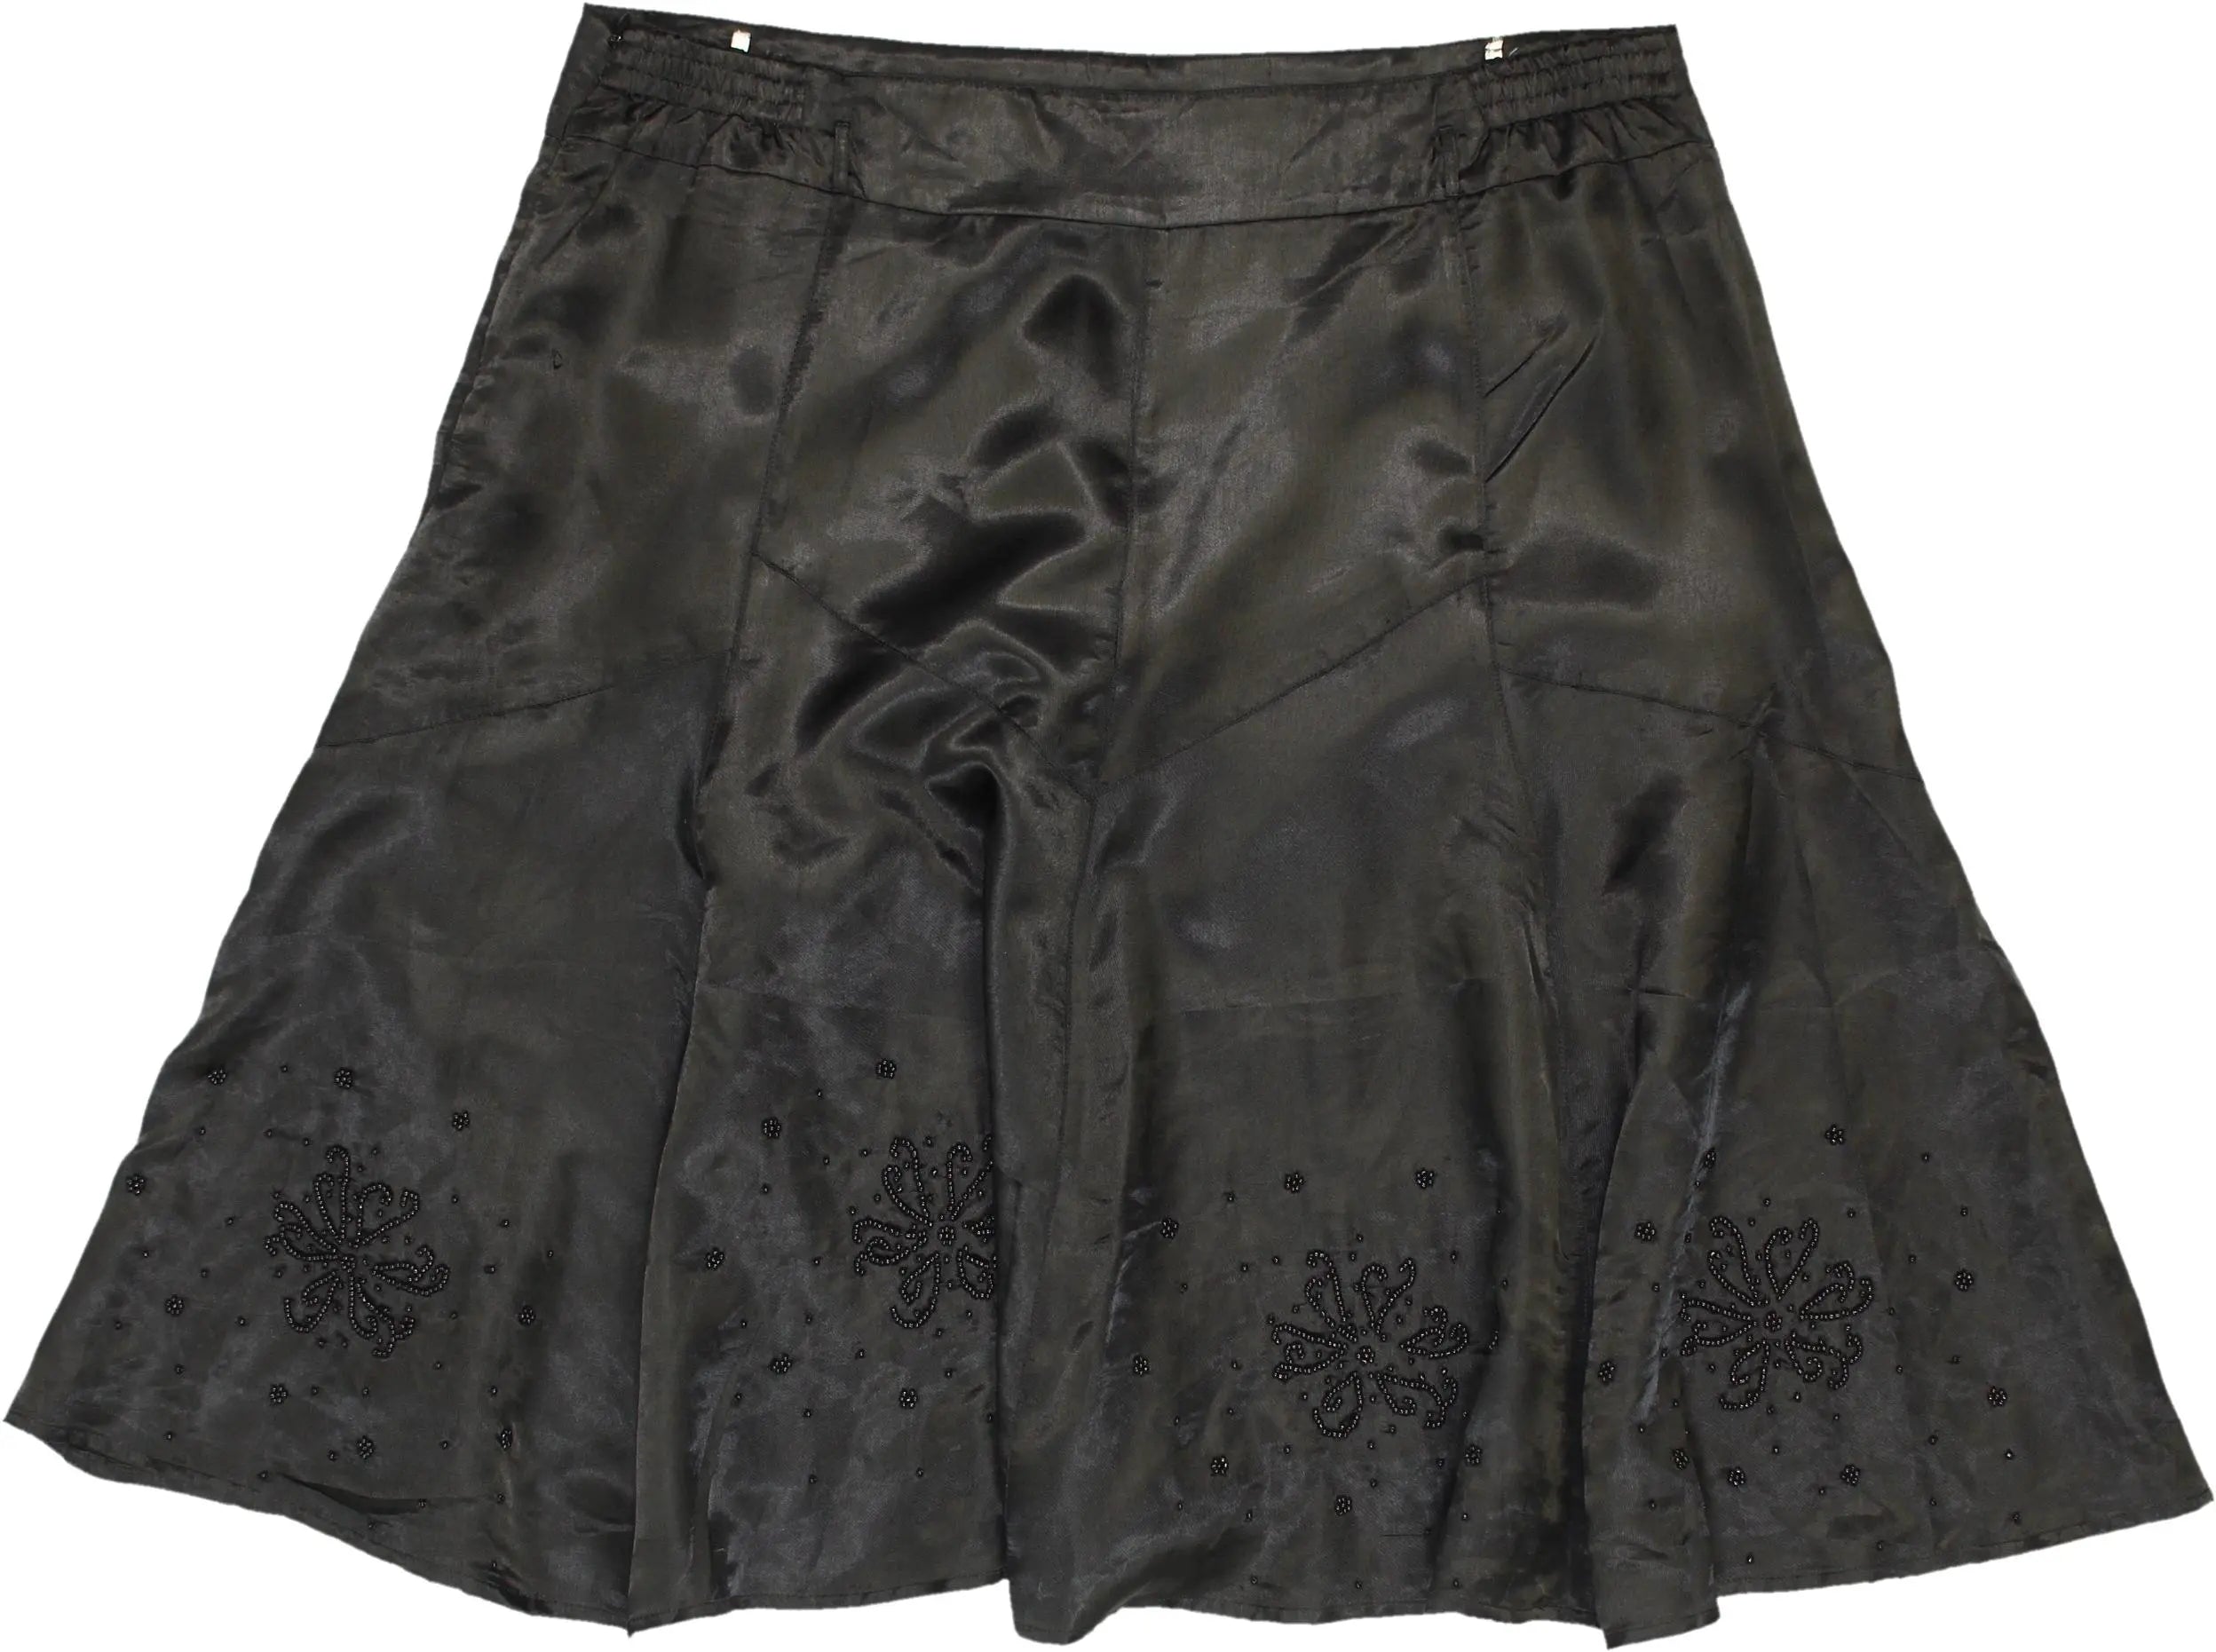 M&S - Satin Skirt with Beads- ThriftTale.com - Vintage and second handclothing